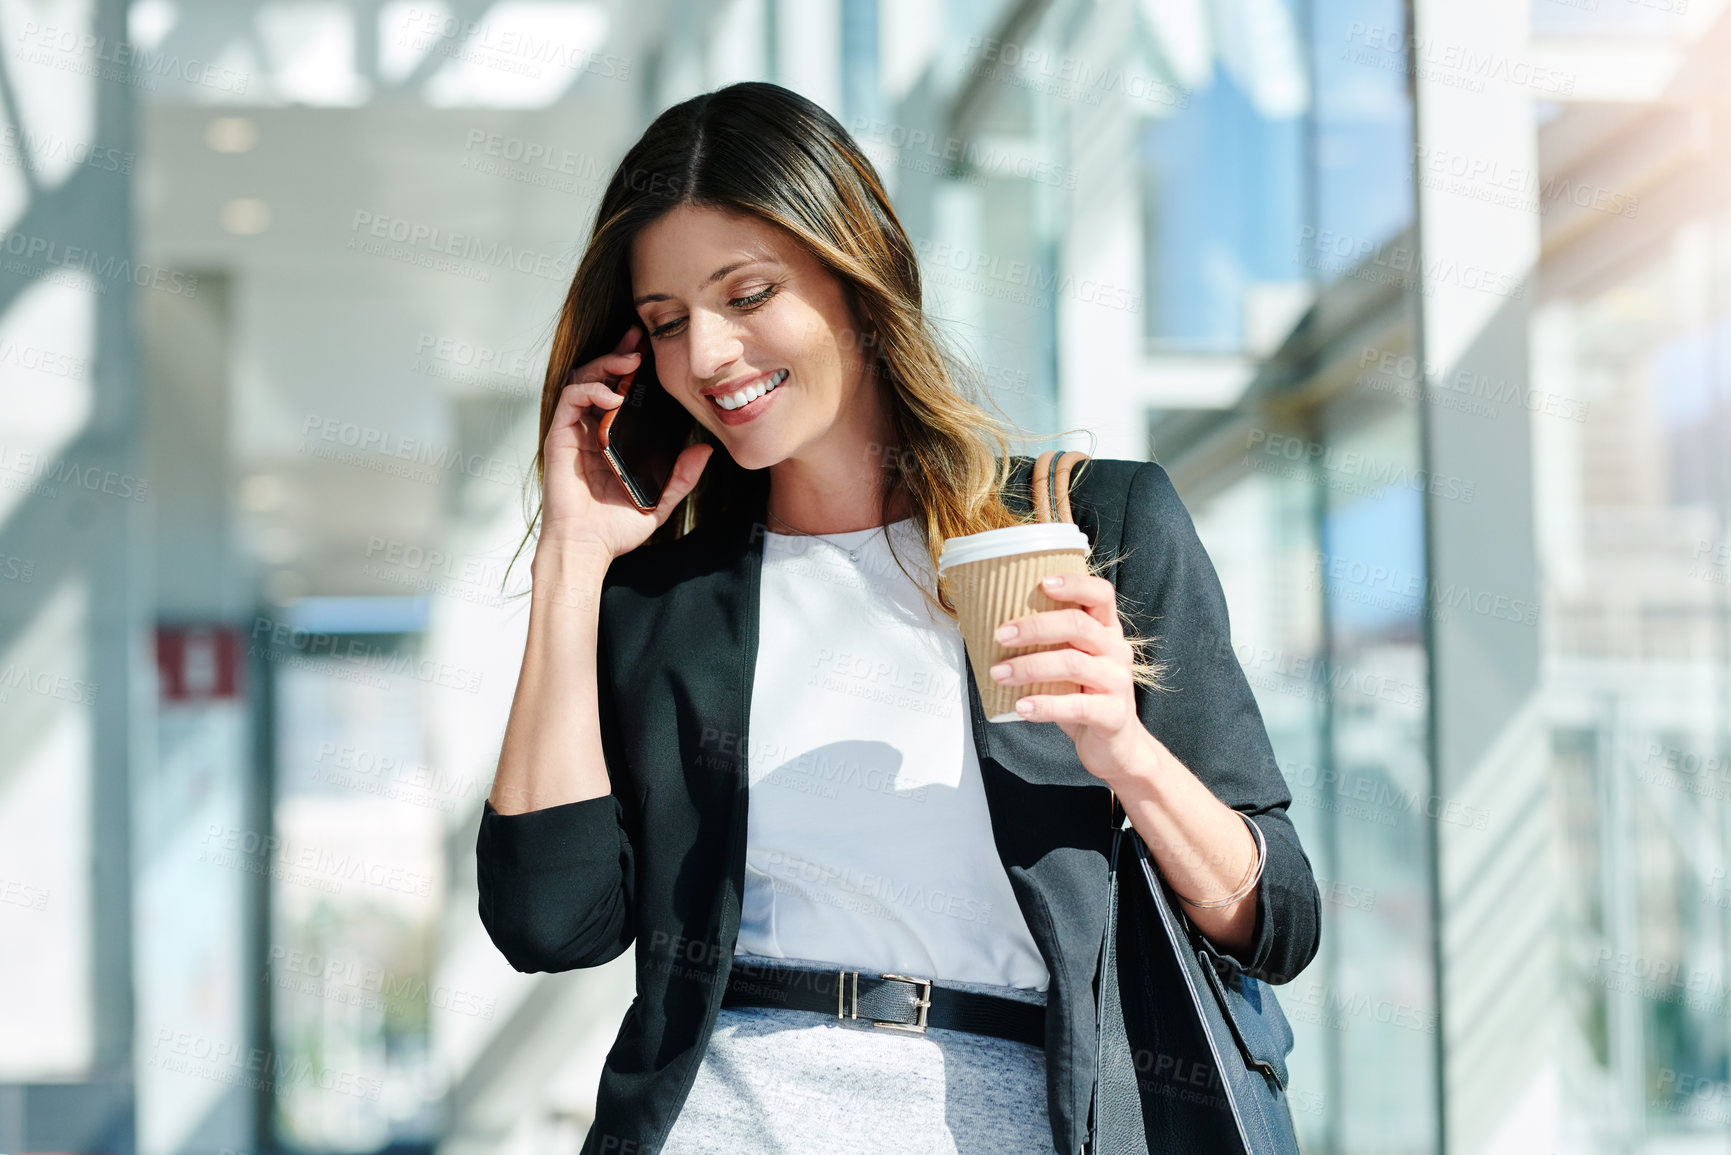 Buy stock photo Cropped shot of an attractive young businesswoman taking a a phonecall while walking through a modern office